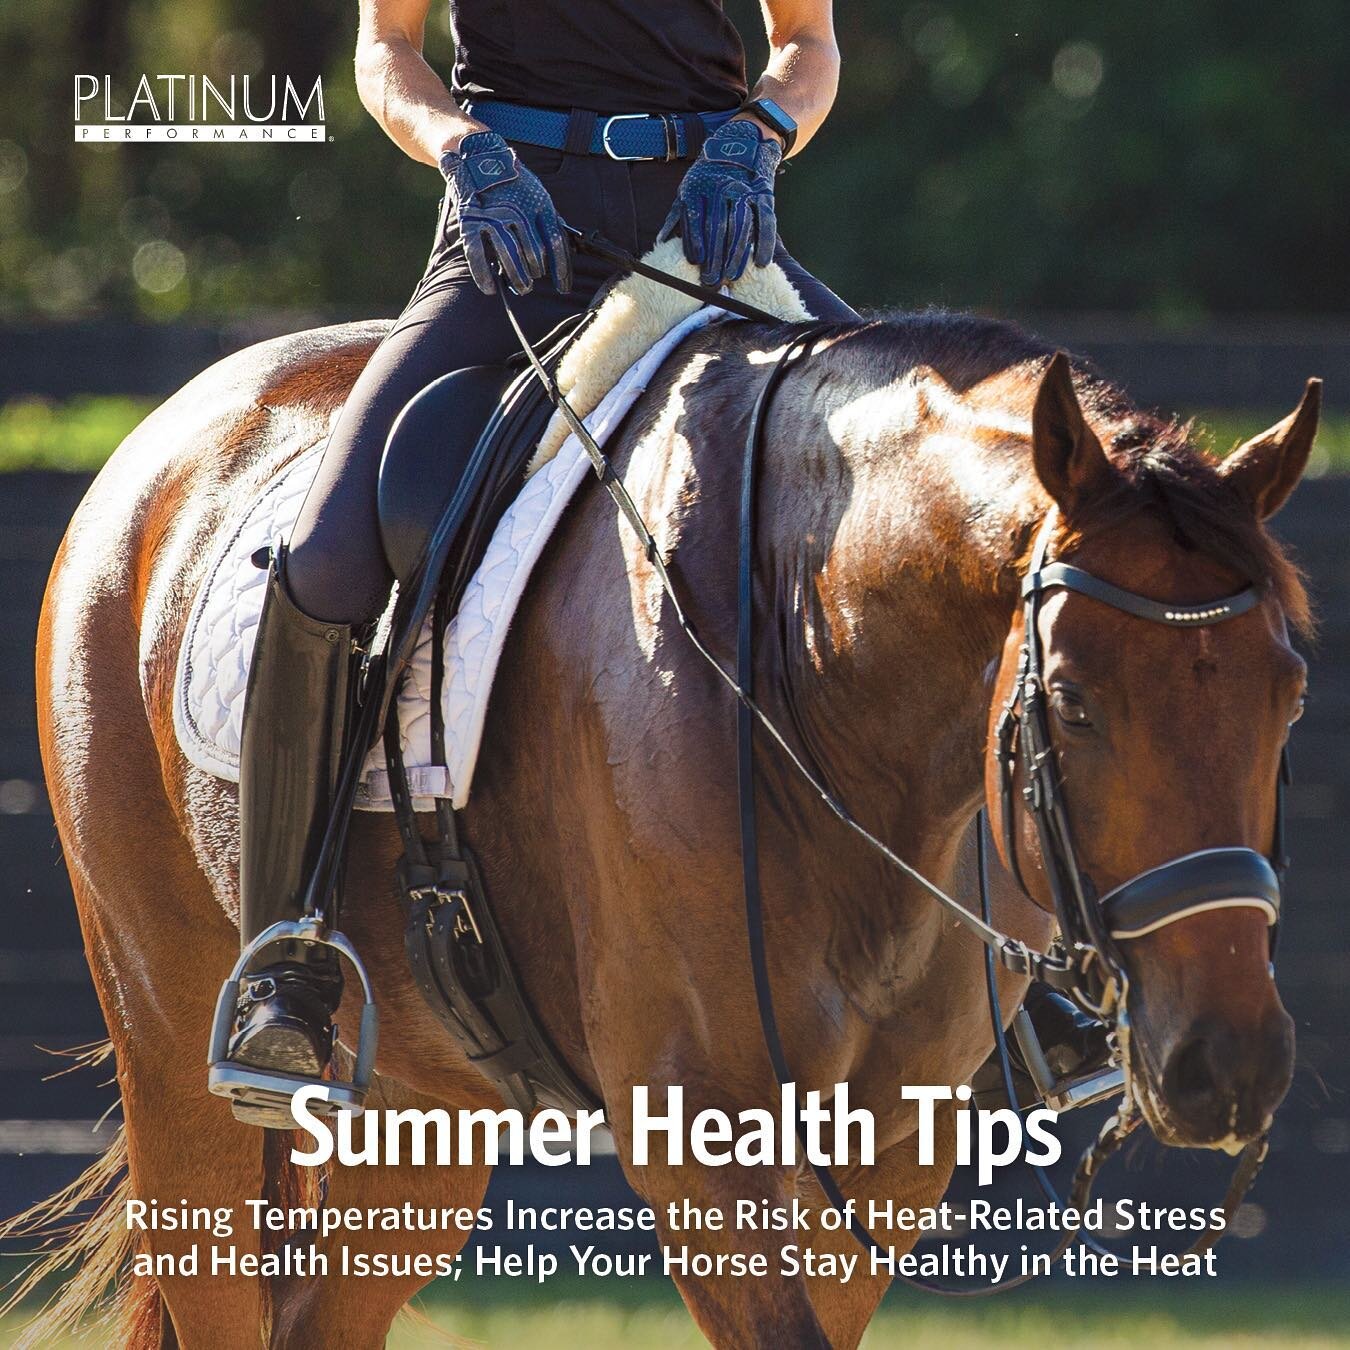 Some great tips to help beat the heat from our friends @platinumperformance 🥵💦 #vipequine